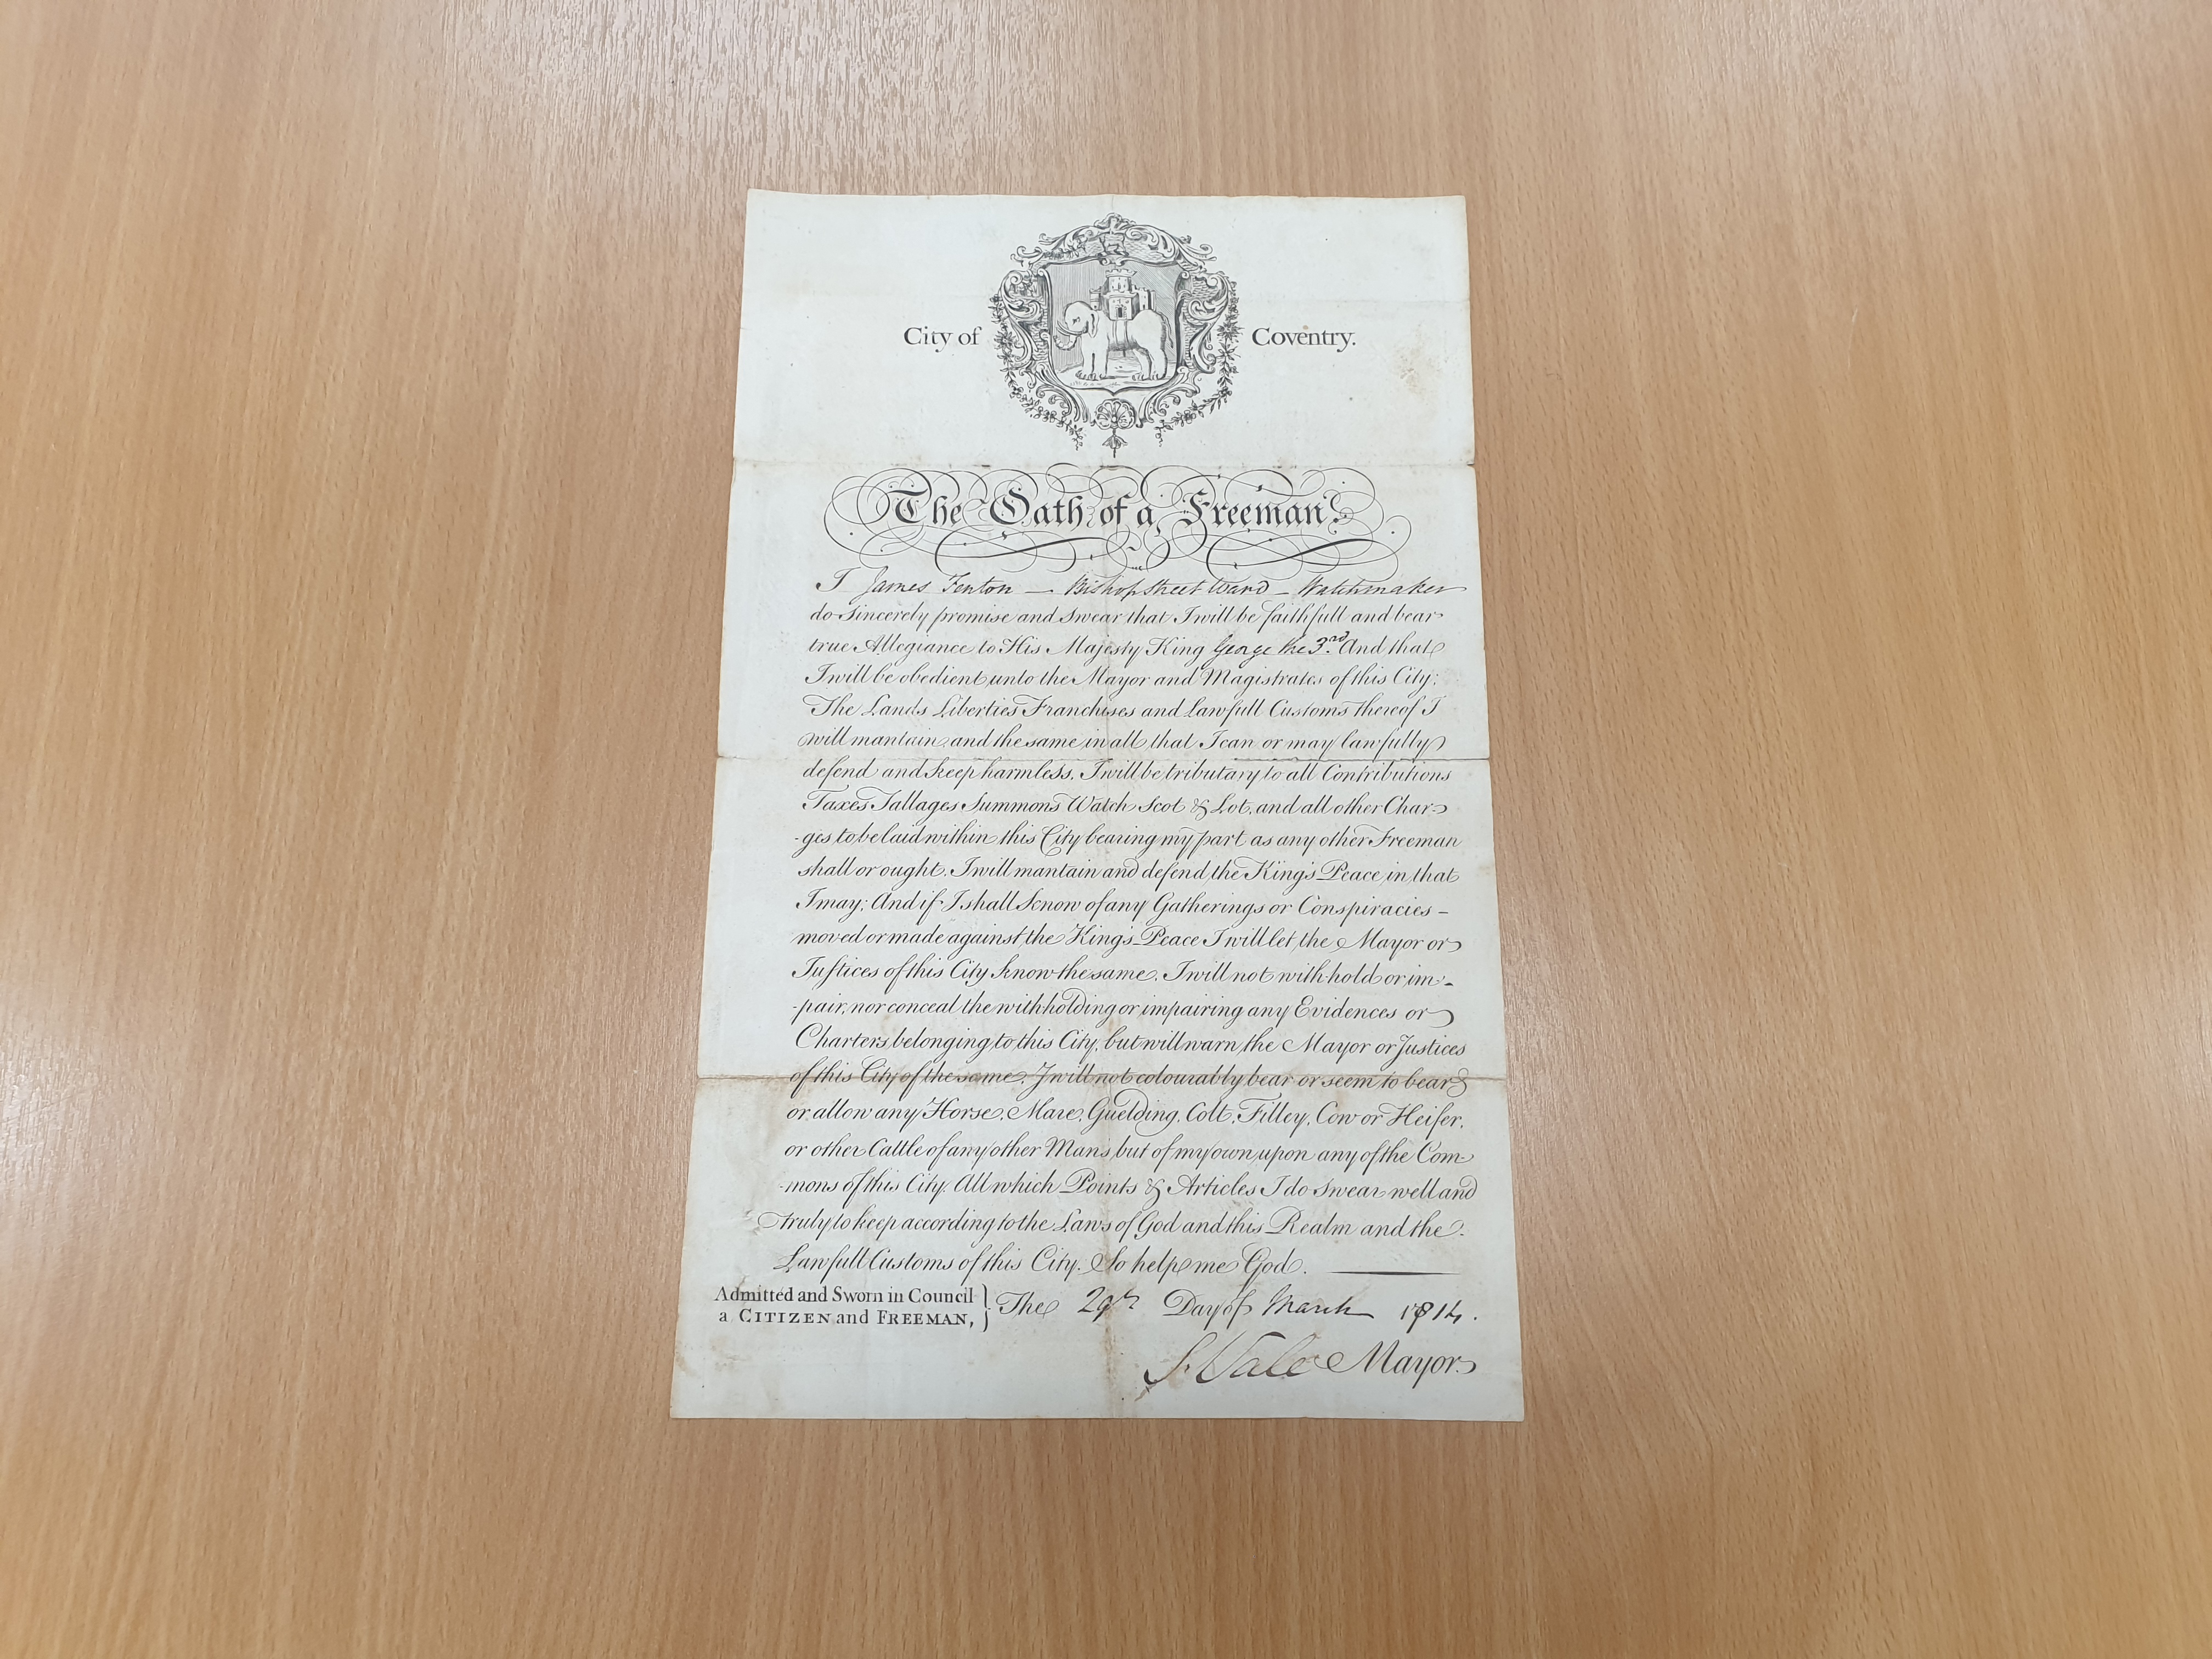 A handwritten Freeman's Oath in italic script with the City of Coventry Elephant and Castle coat of arms printed at the top.